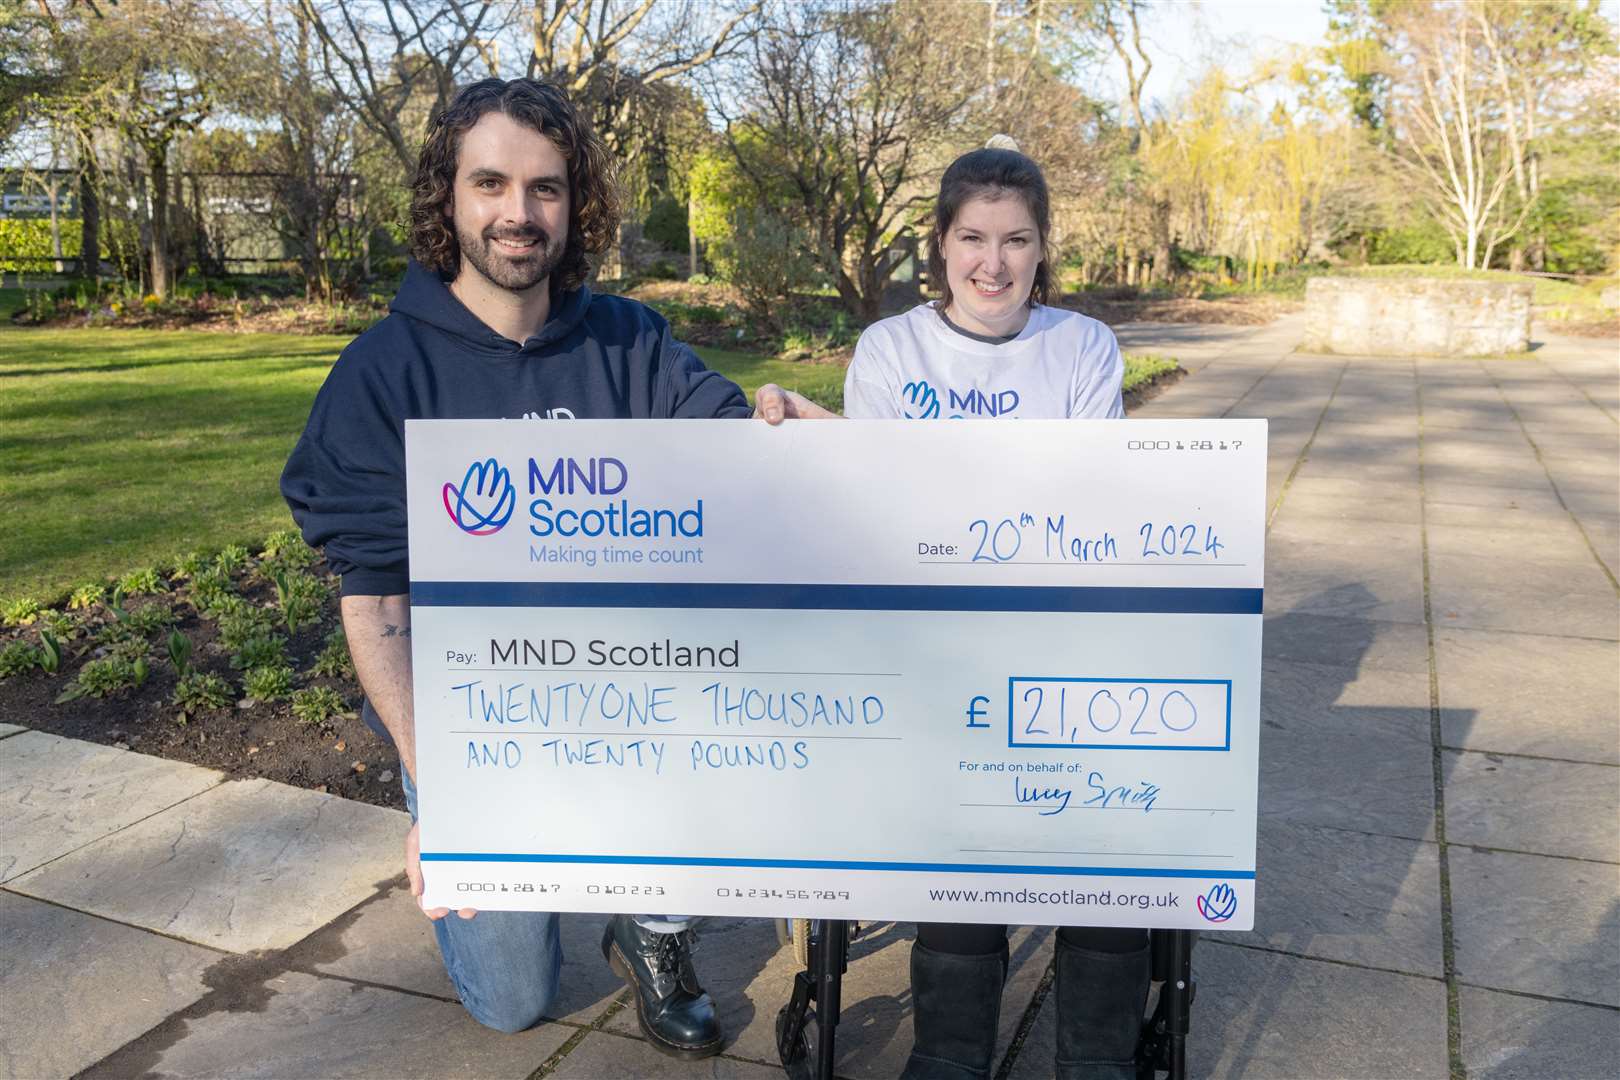 Lucy Smith with Jonathan Mitchell from MND Scotland.